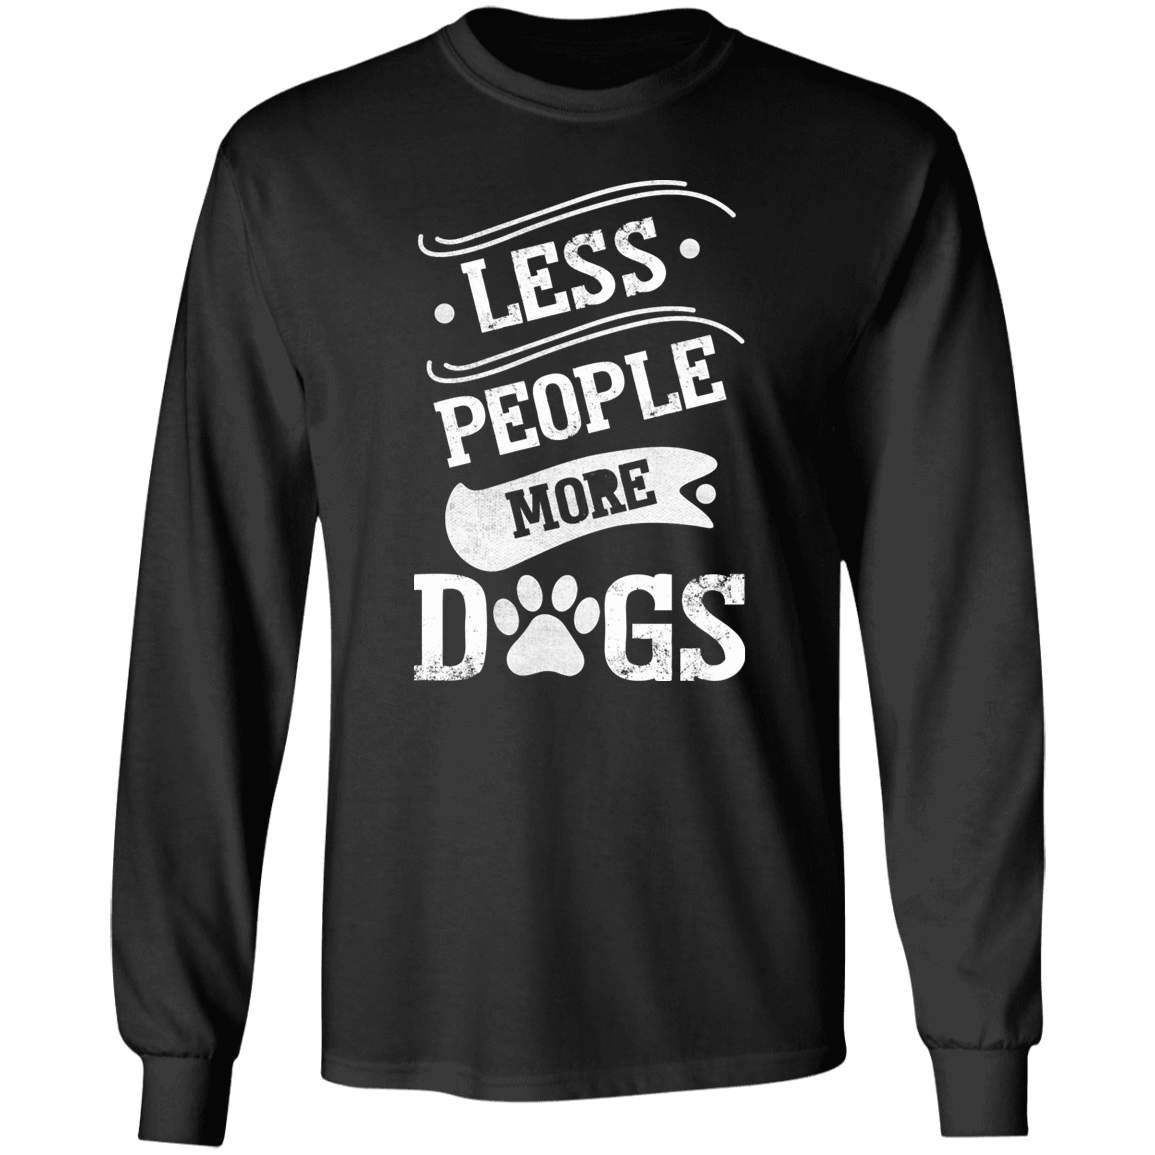 Less People More Dogs - Long Sleeve T Shirt.